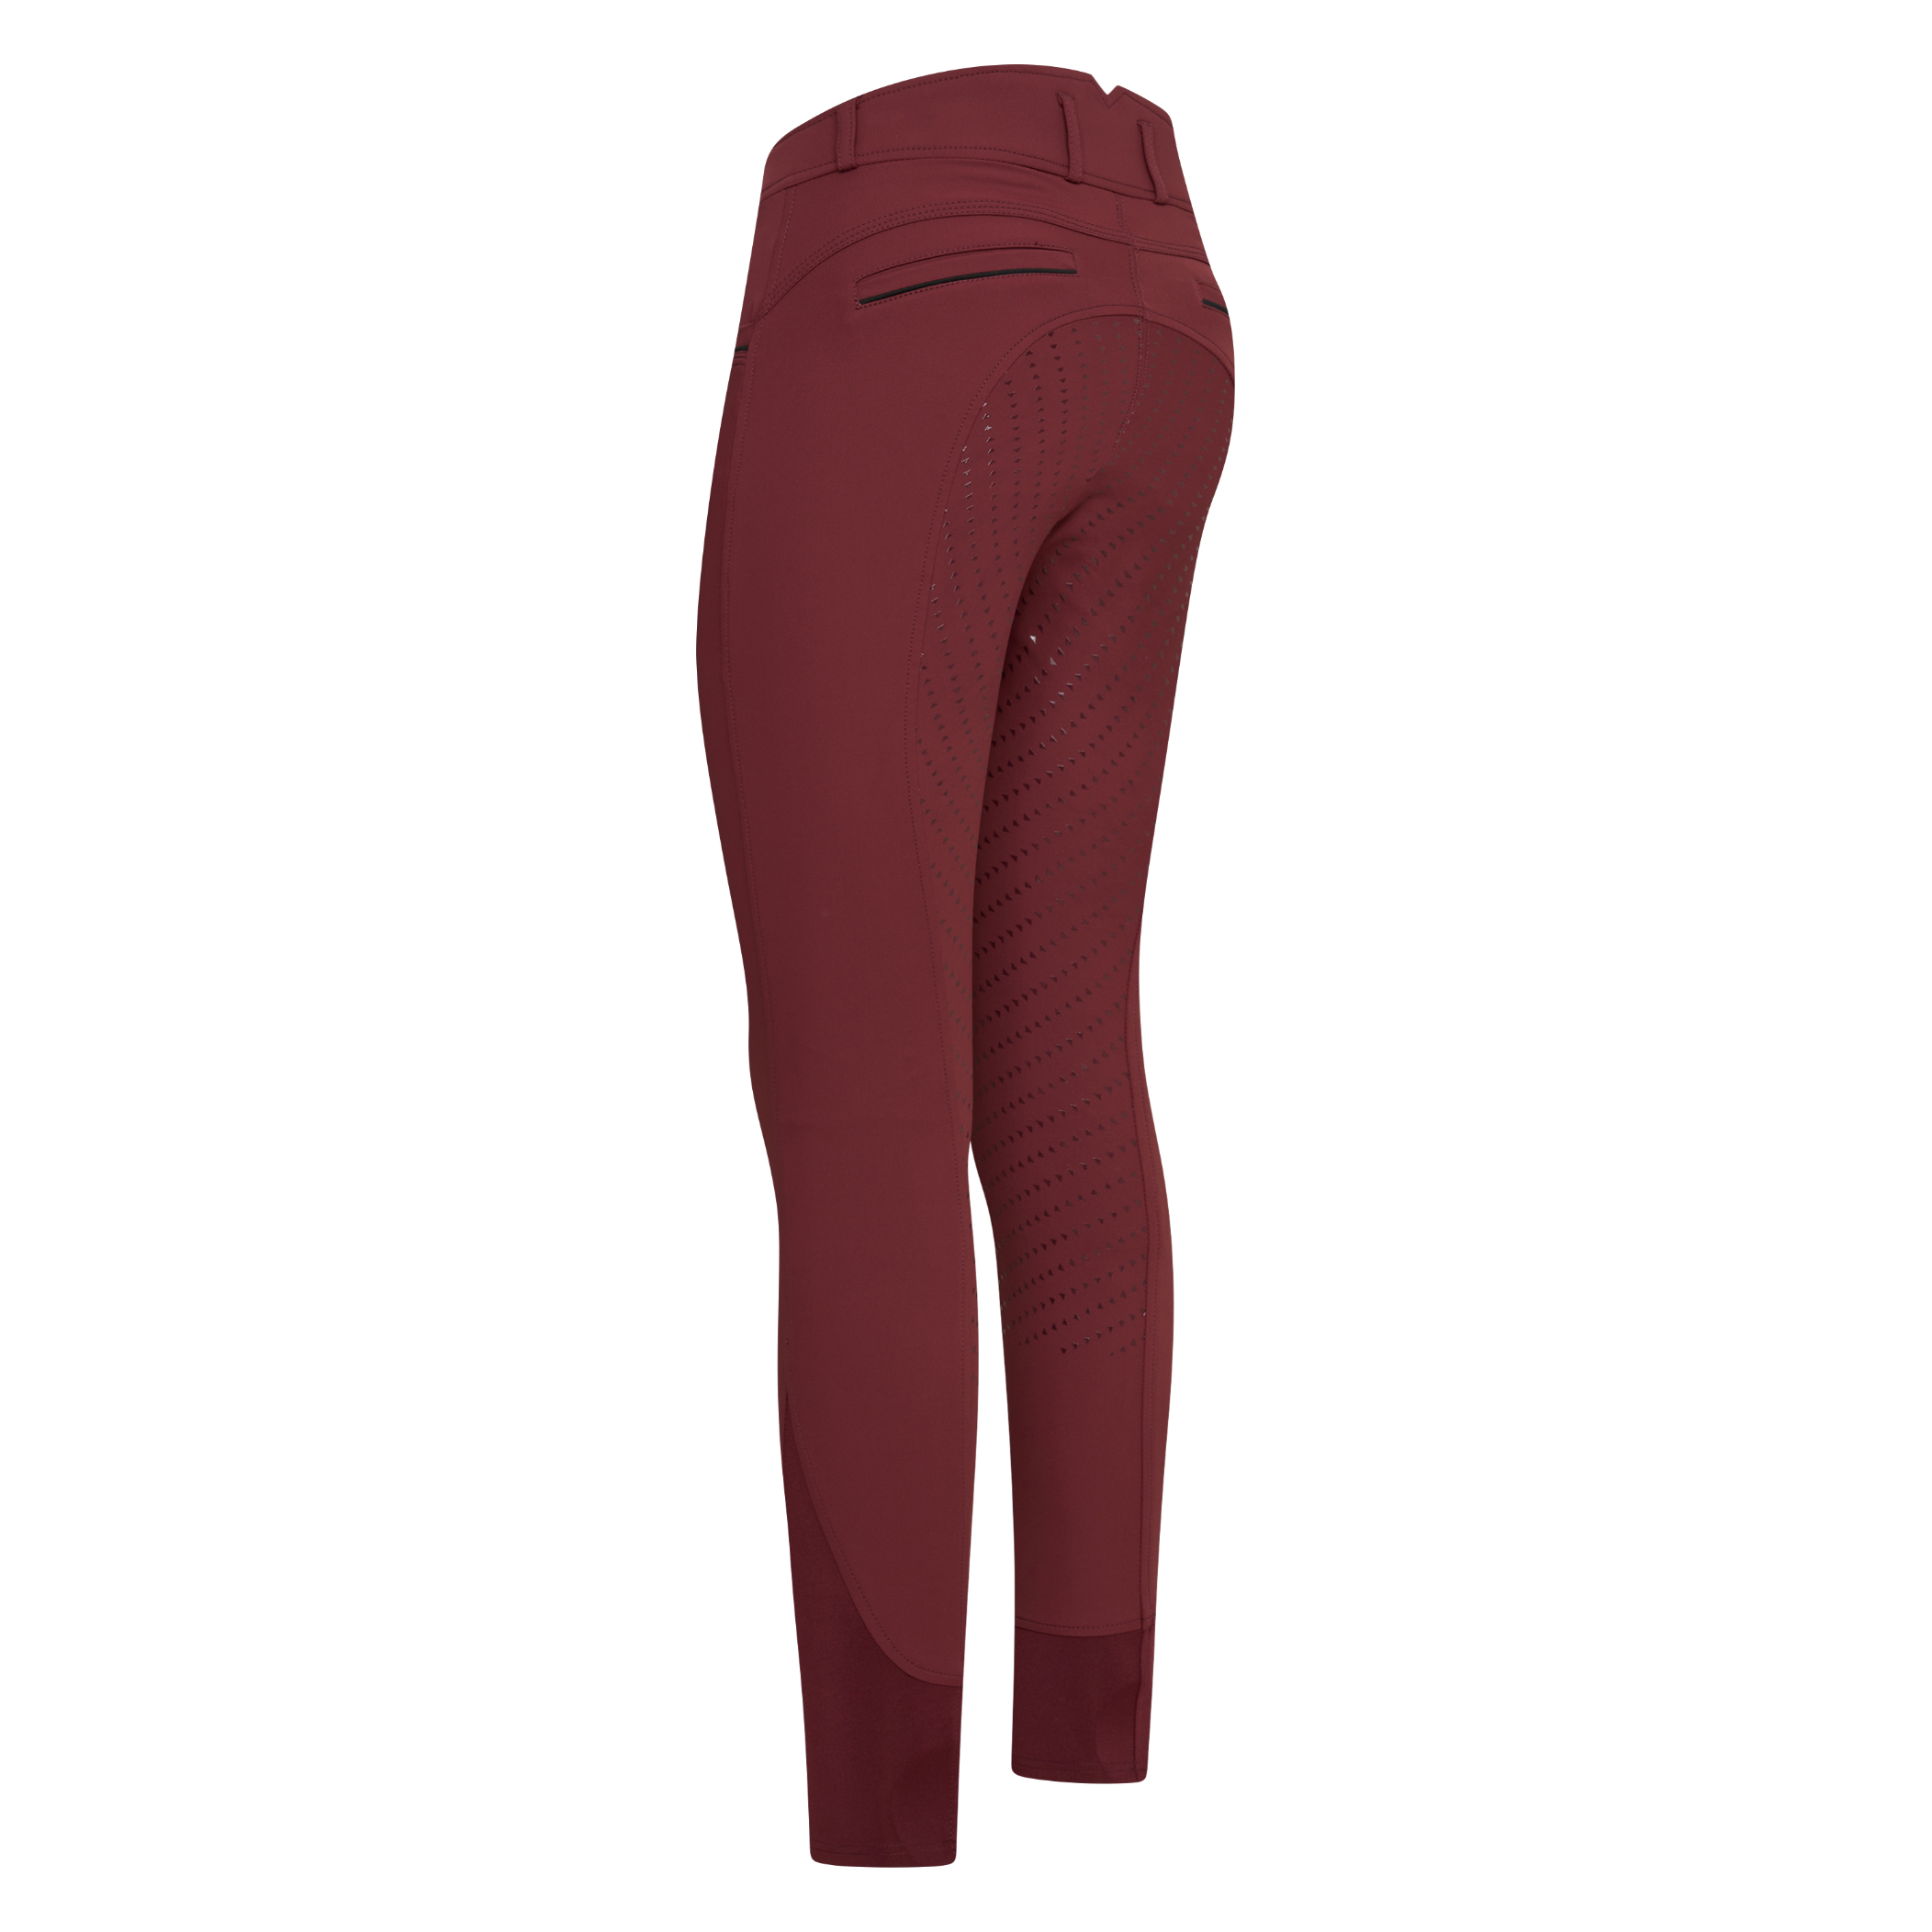 Discover more than 147 red riding leggings latest